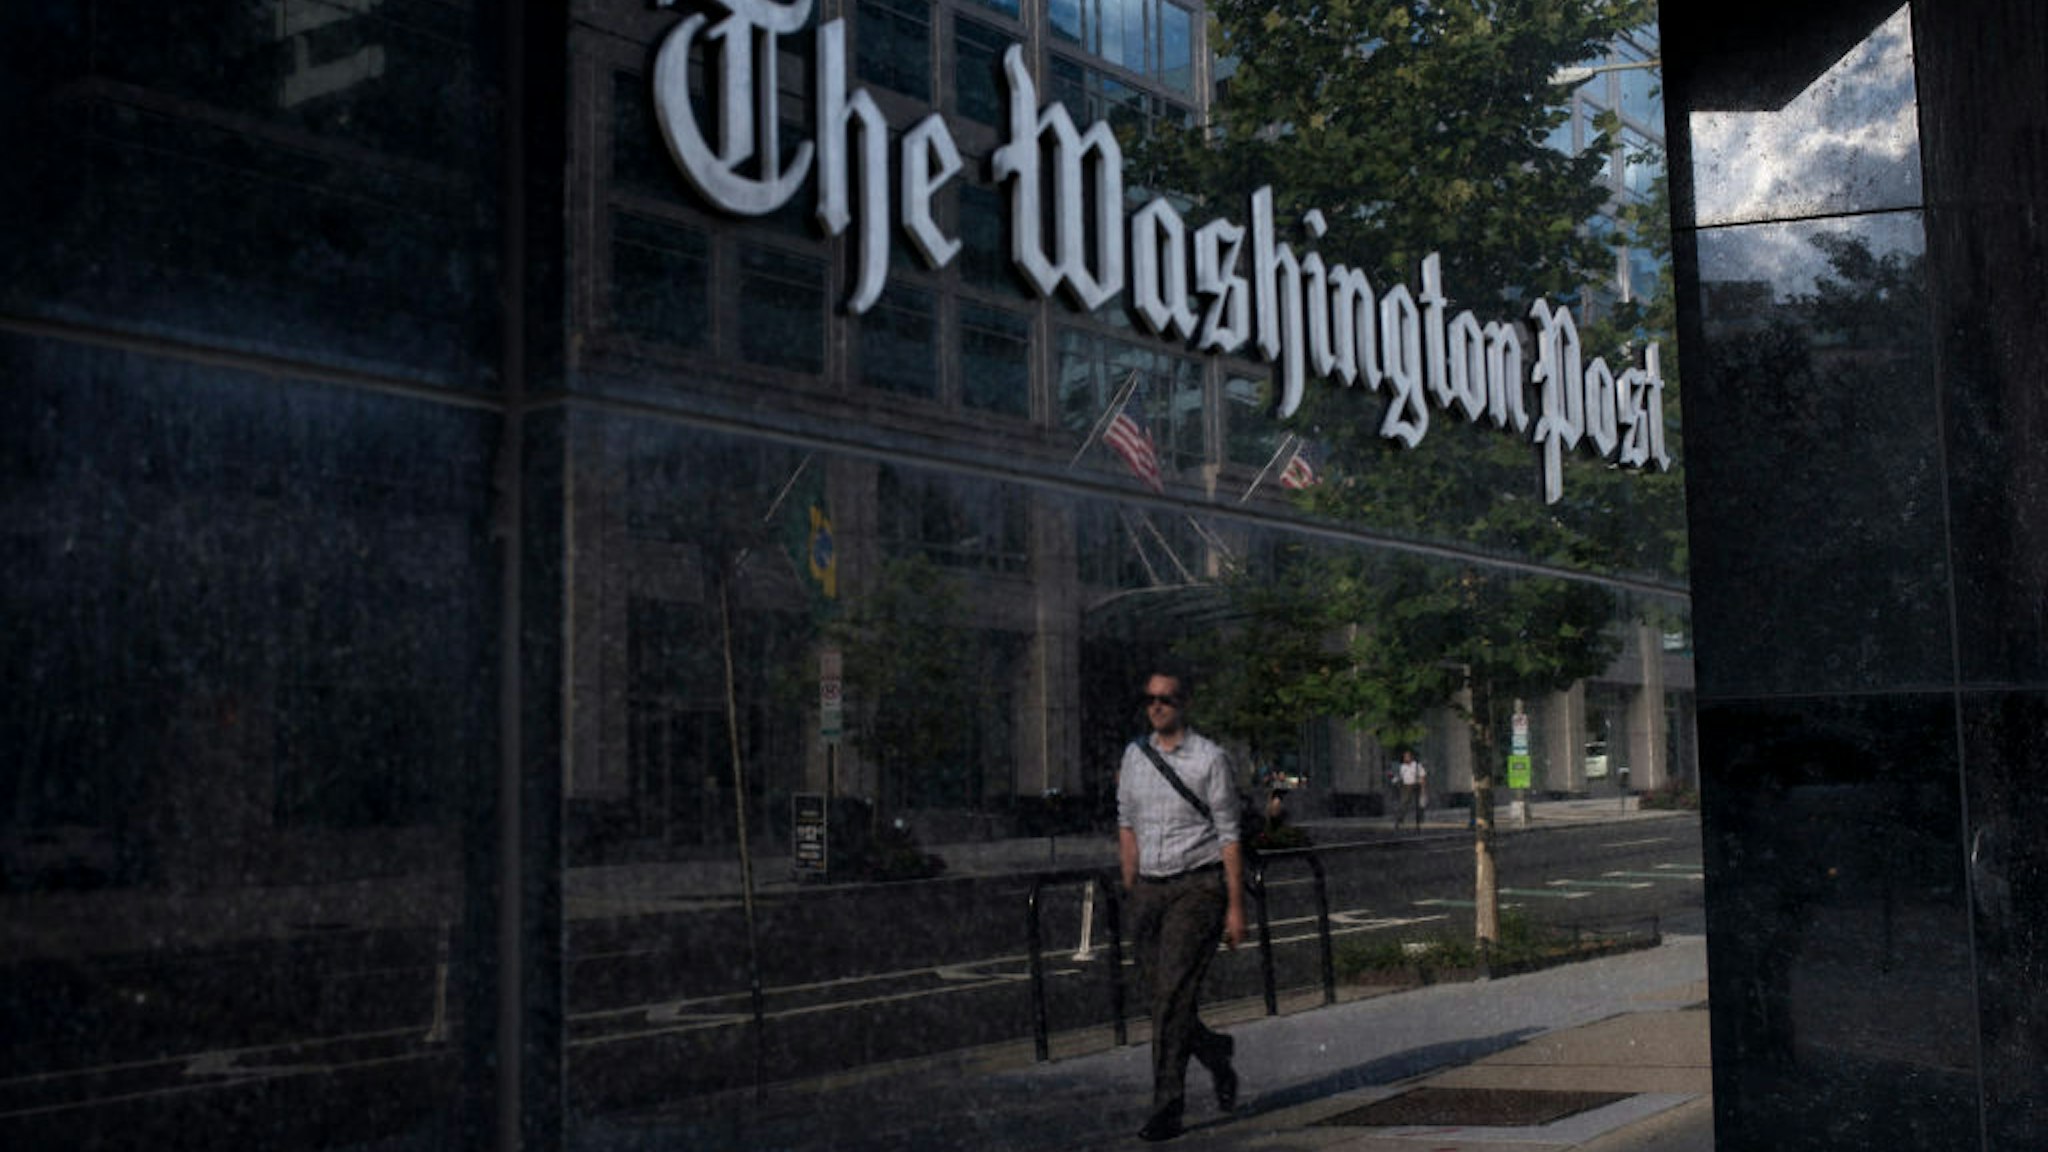 A man walks past The Washington Post on August 5, 2013 in Washington, DC after it was announced that Amazon.com founder and CEO Jeff Bezos had agreed to purchase the Post for USD 250 million.